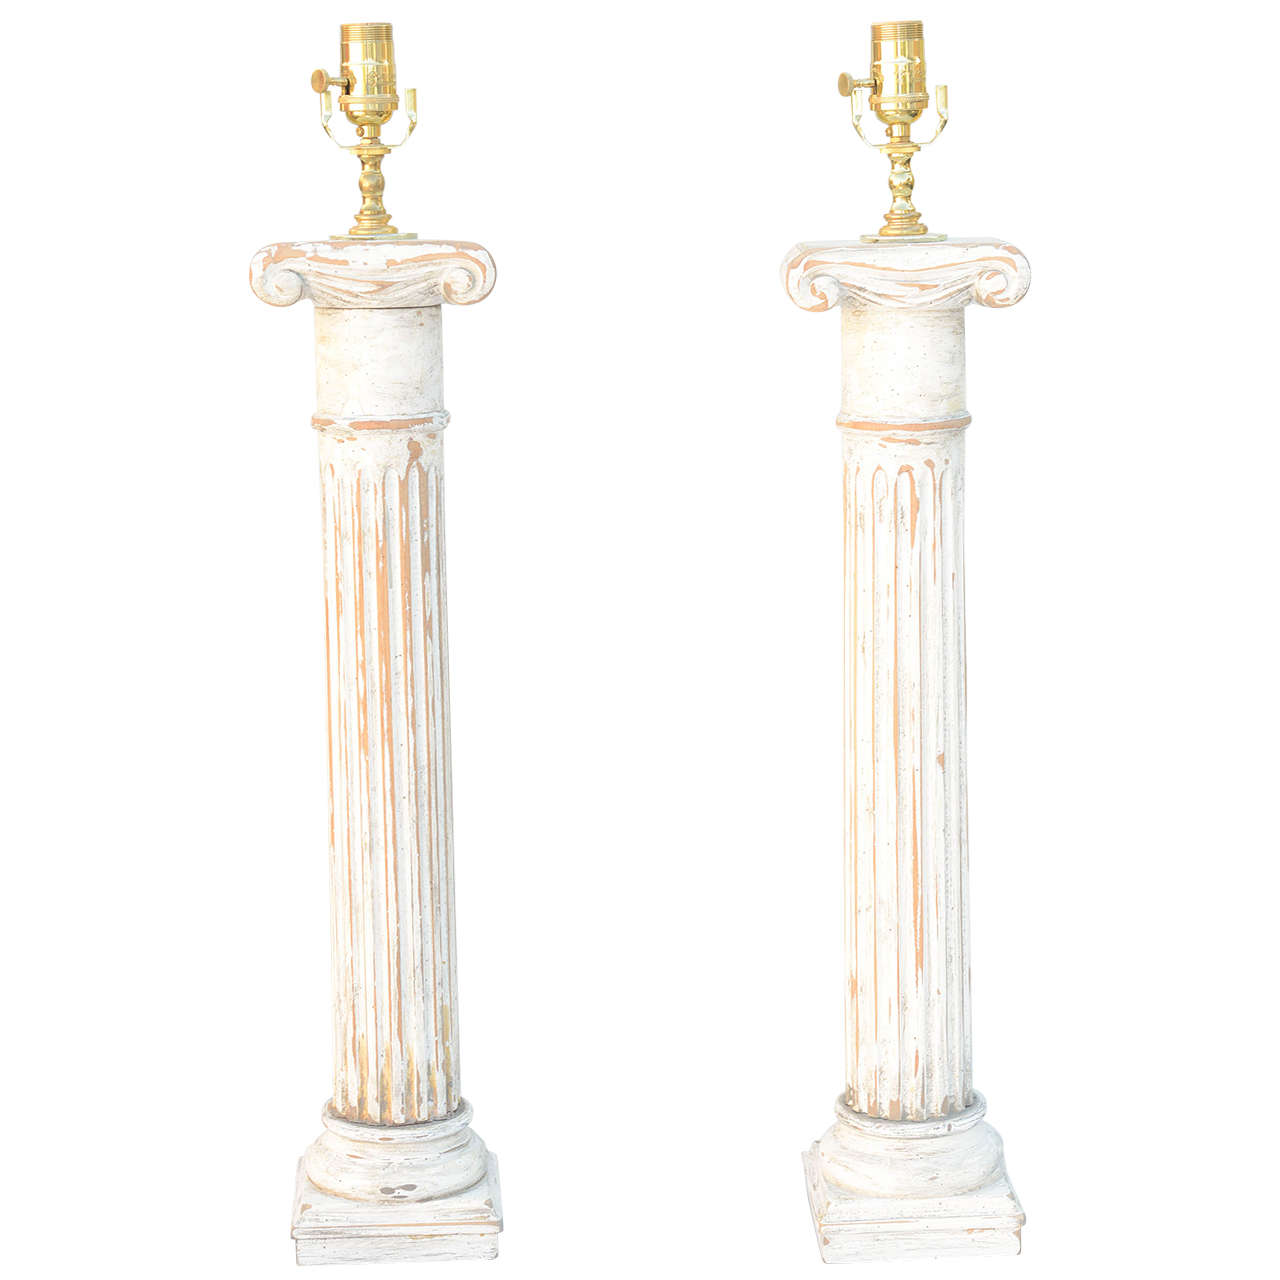 Pair of Carved Wood Column Lamps